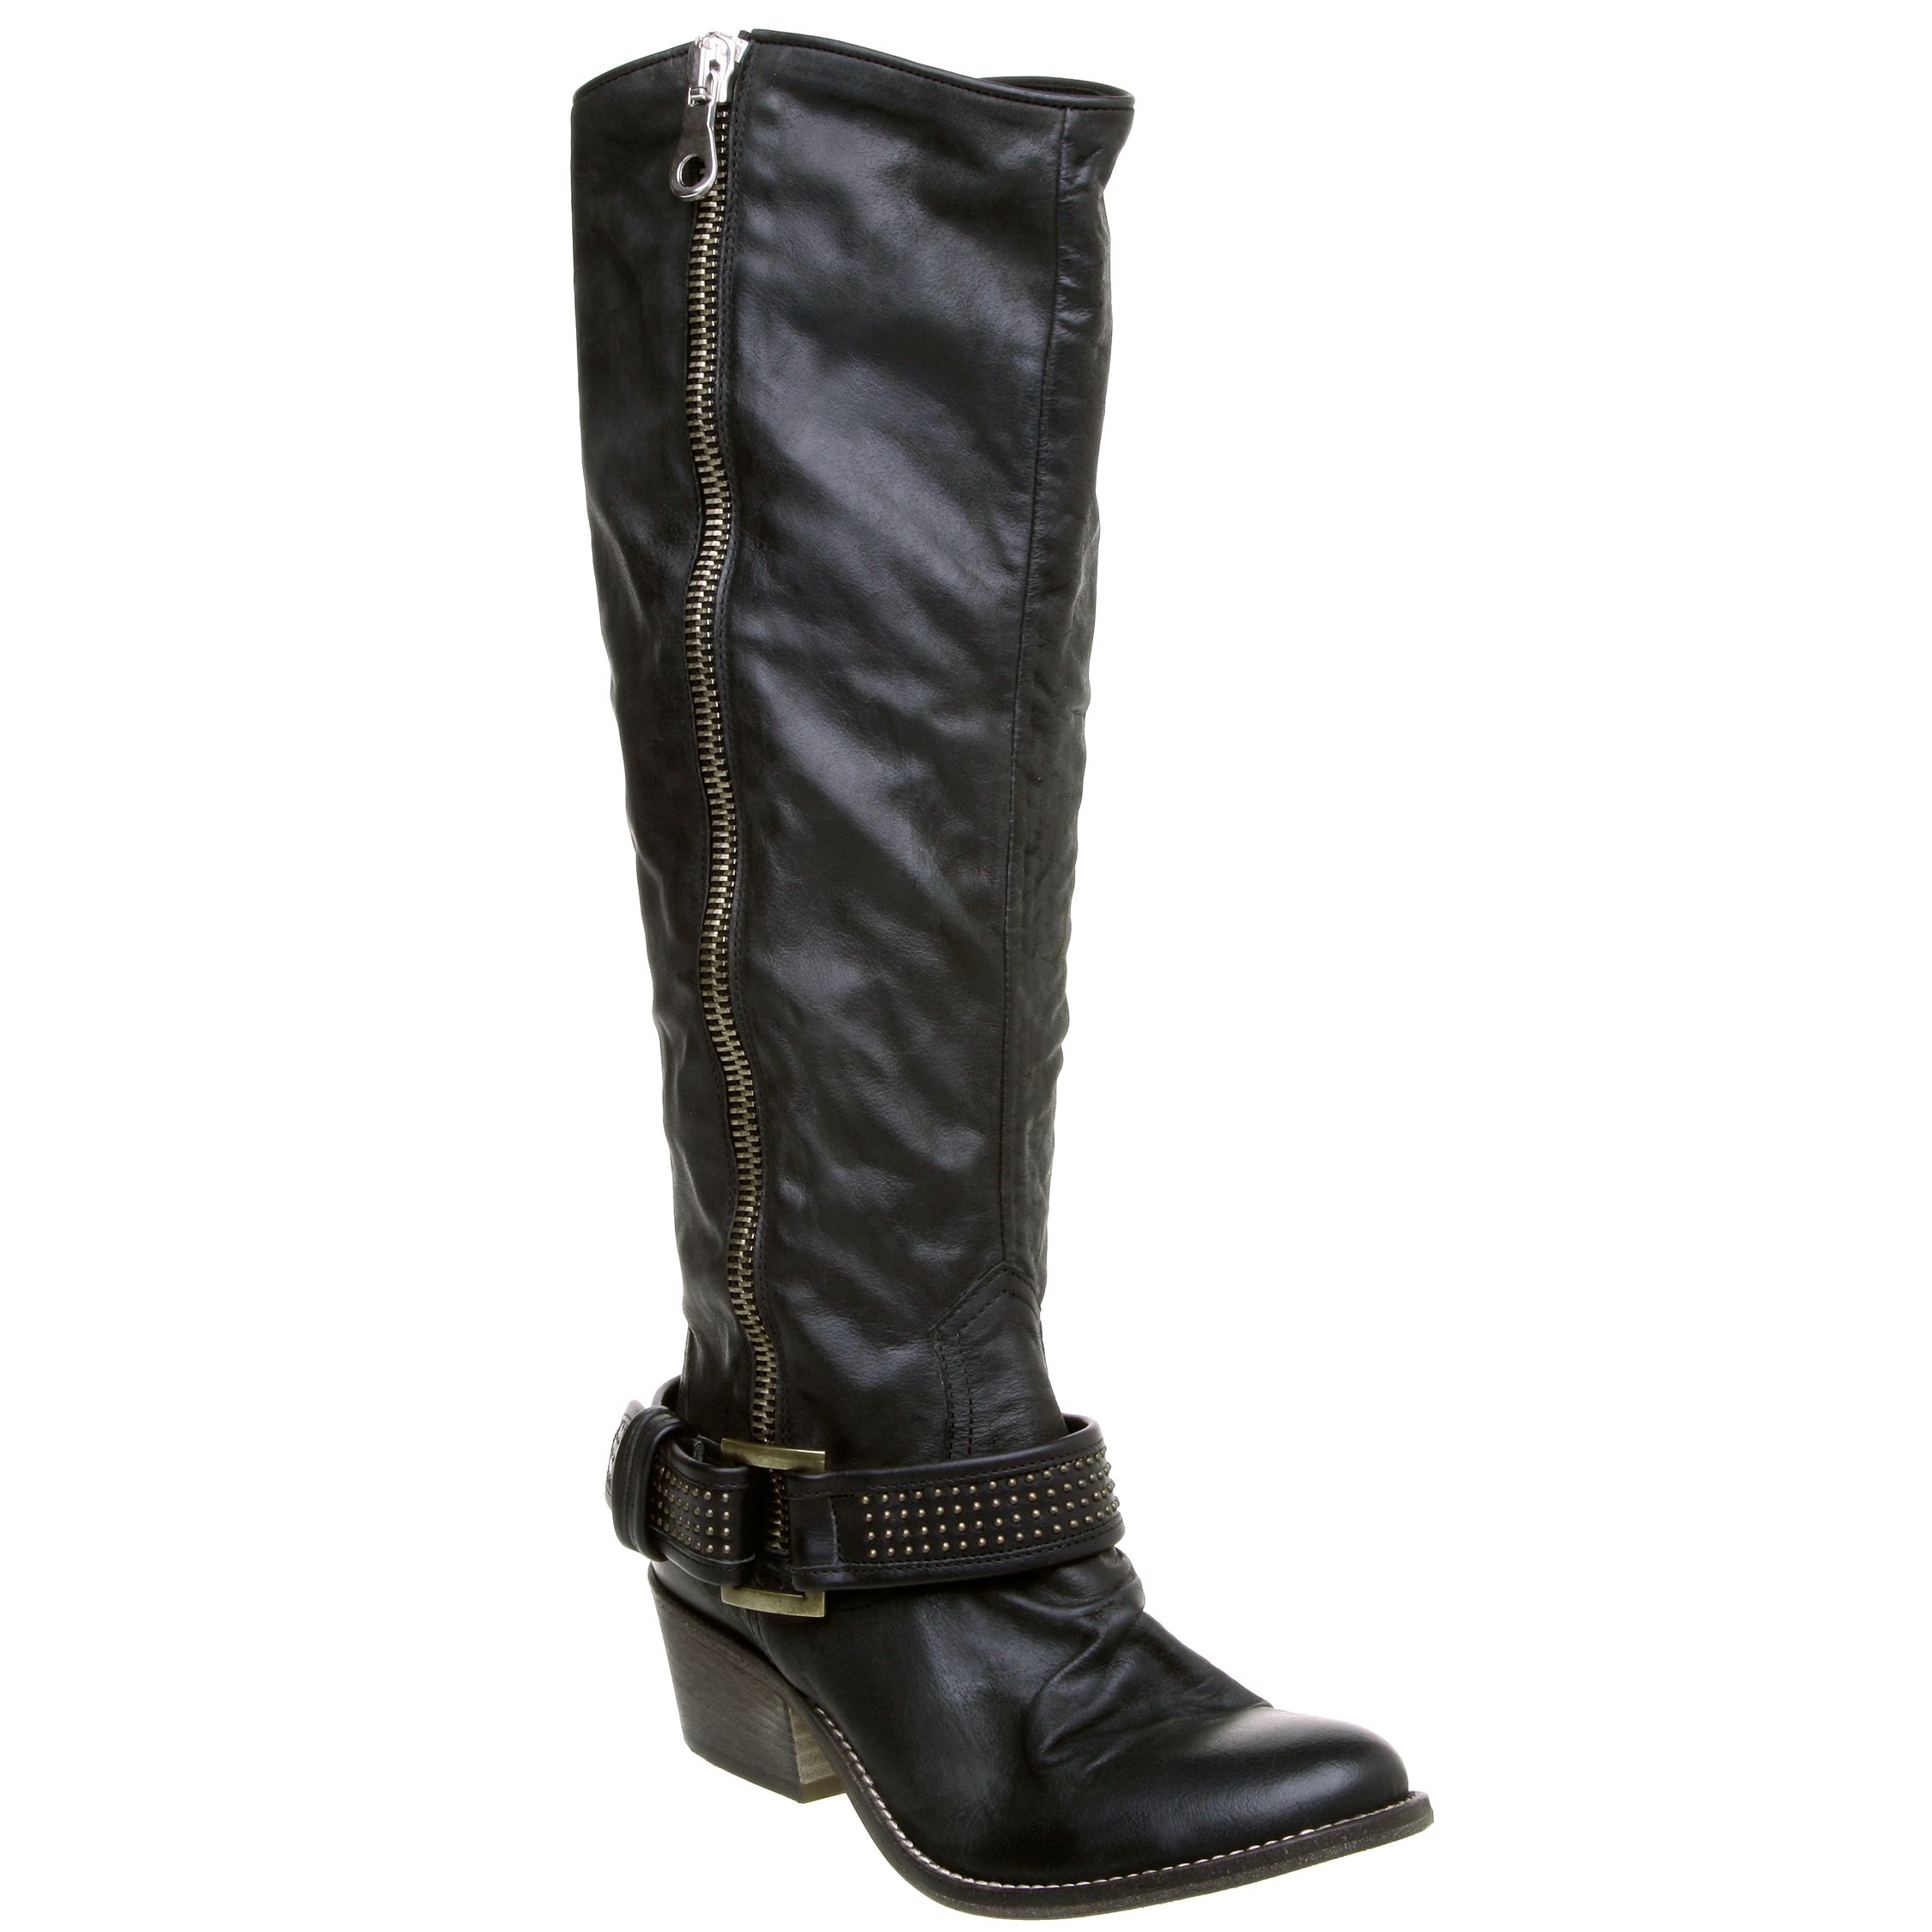 Pied A Terre Payne Knee High Boots, Black at John Lewis